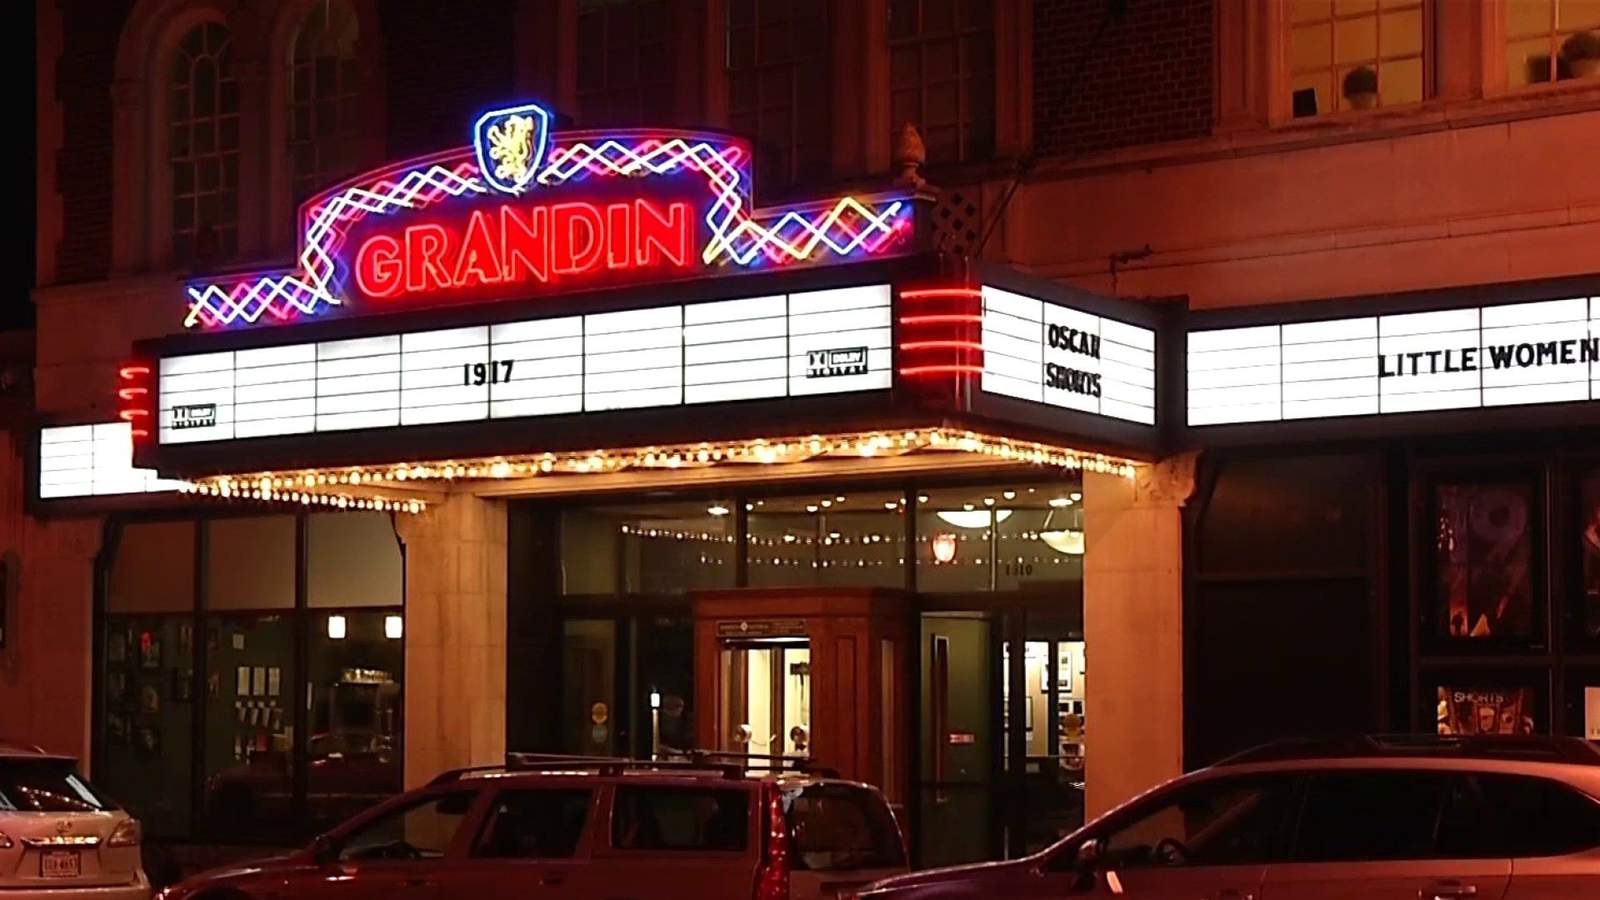 Grandin Theatre to remain closed until further notice, citing coronavirus concerns